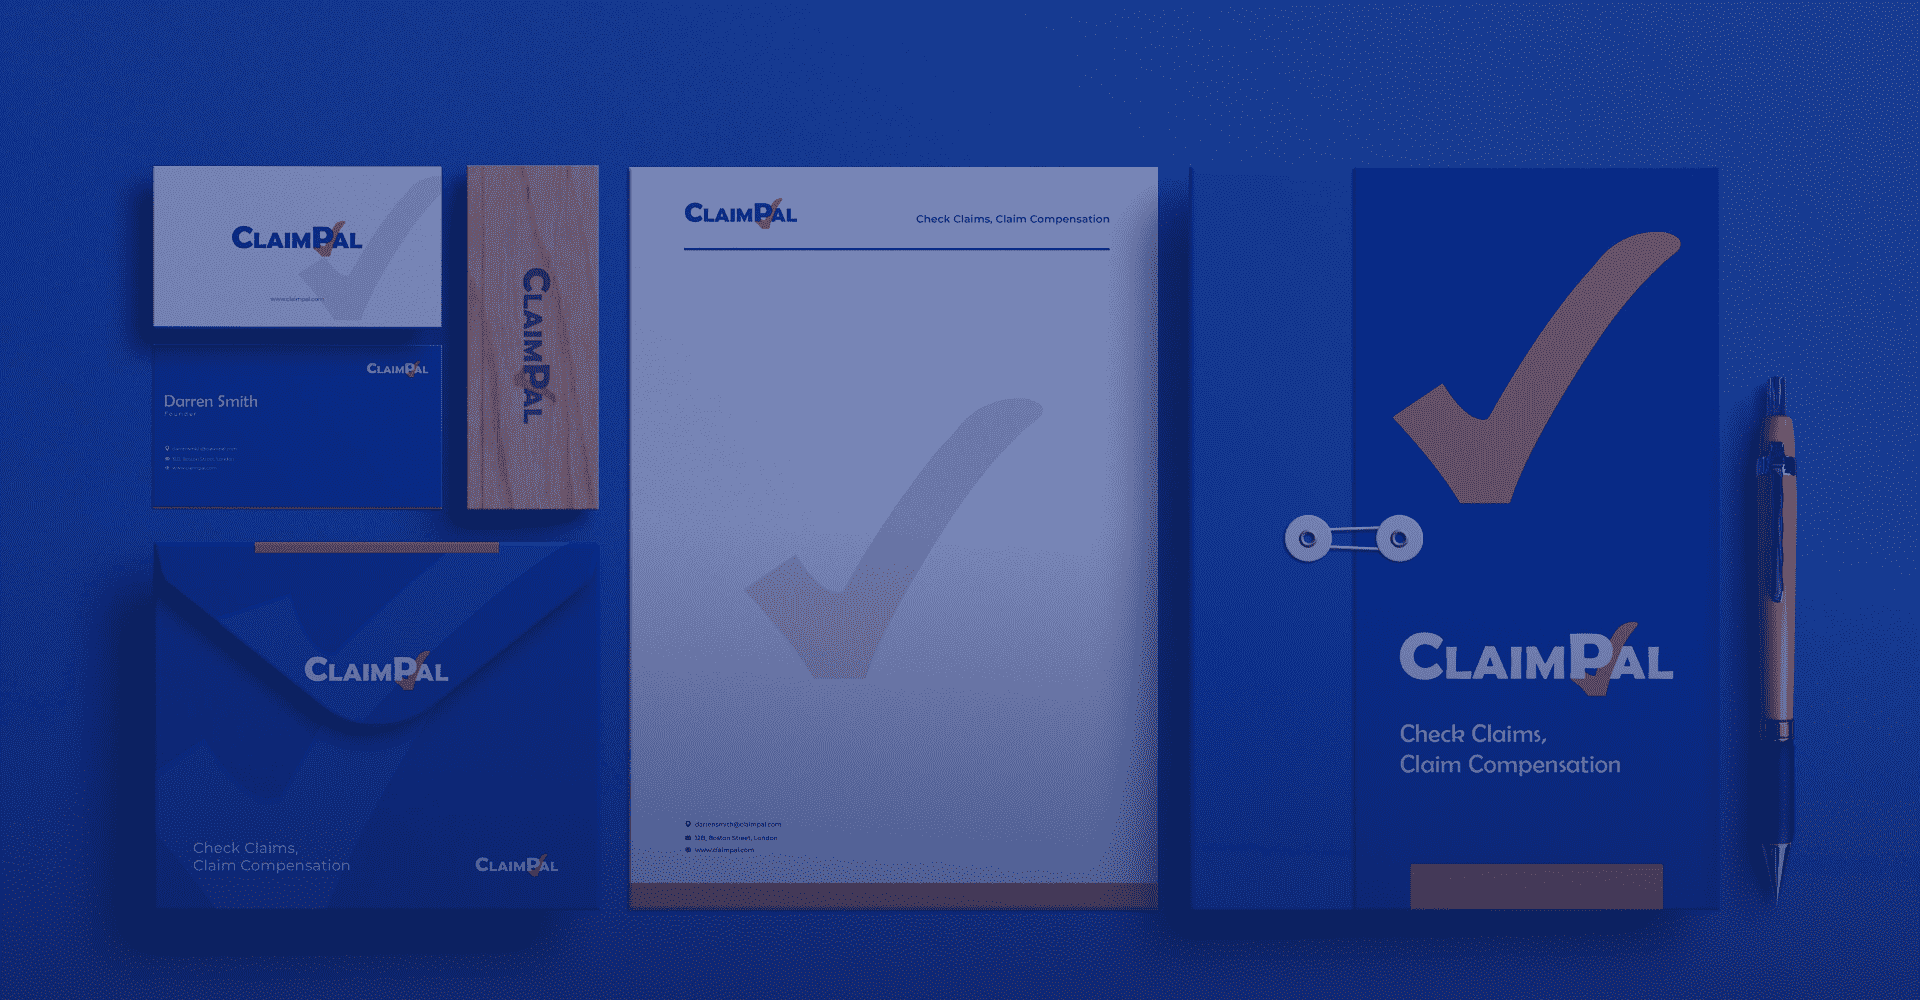 Claimpal - A Branding & UX Project